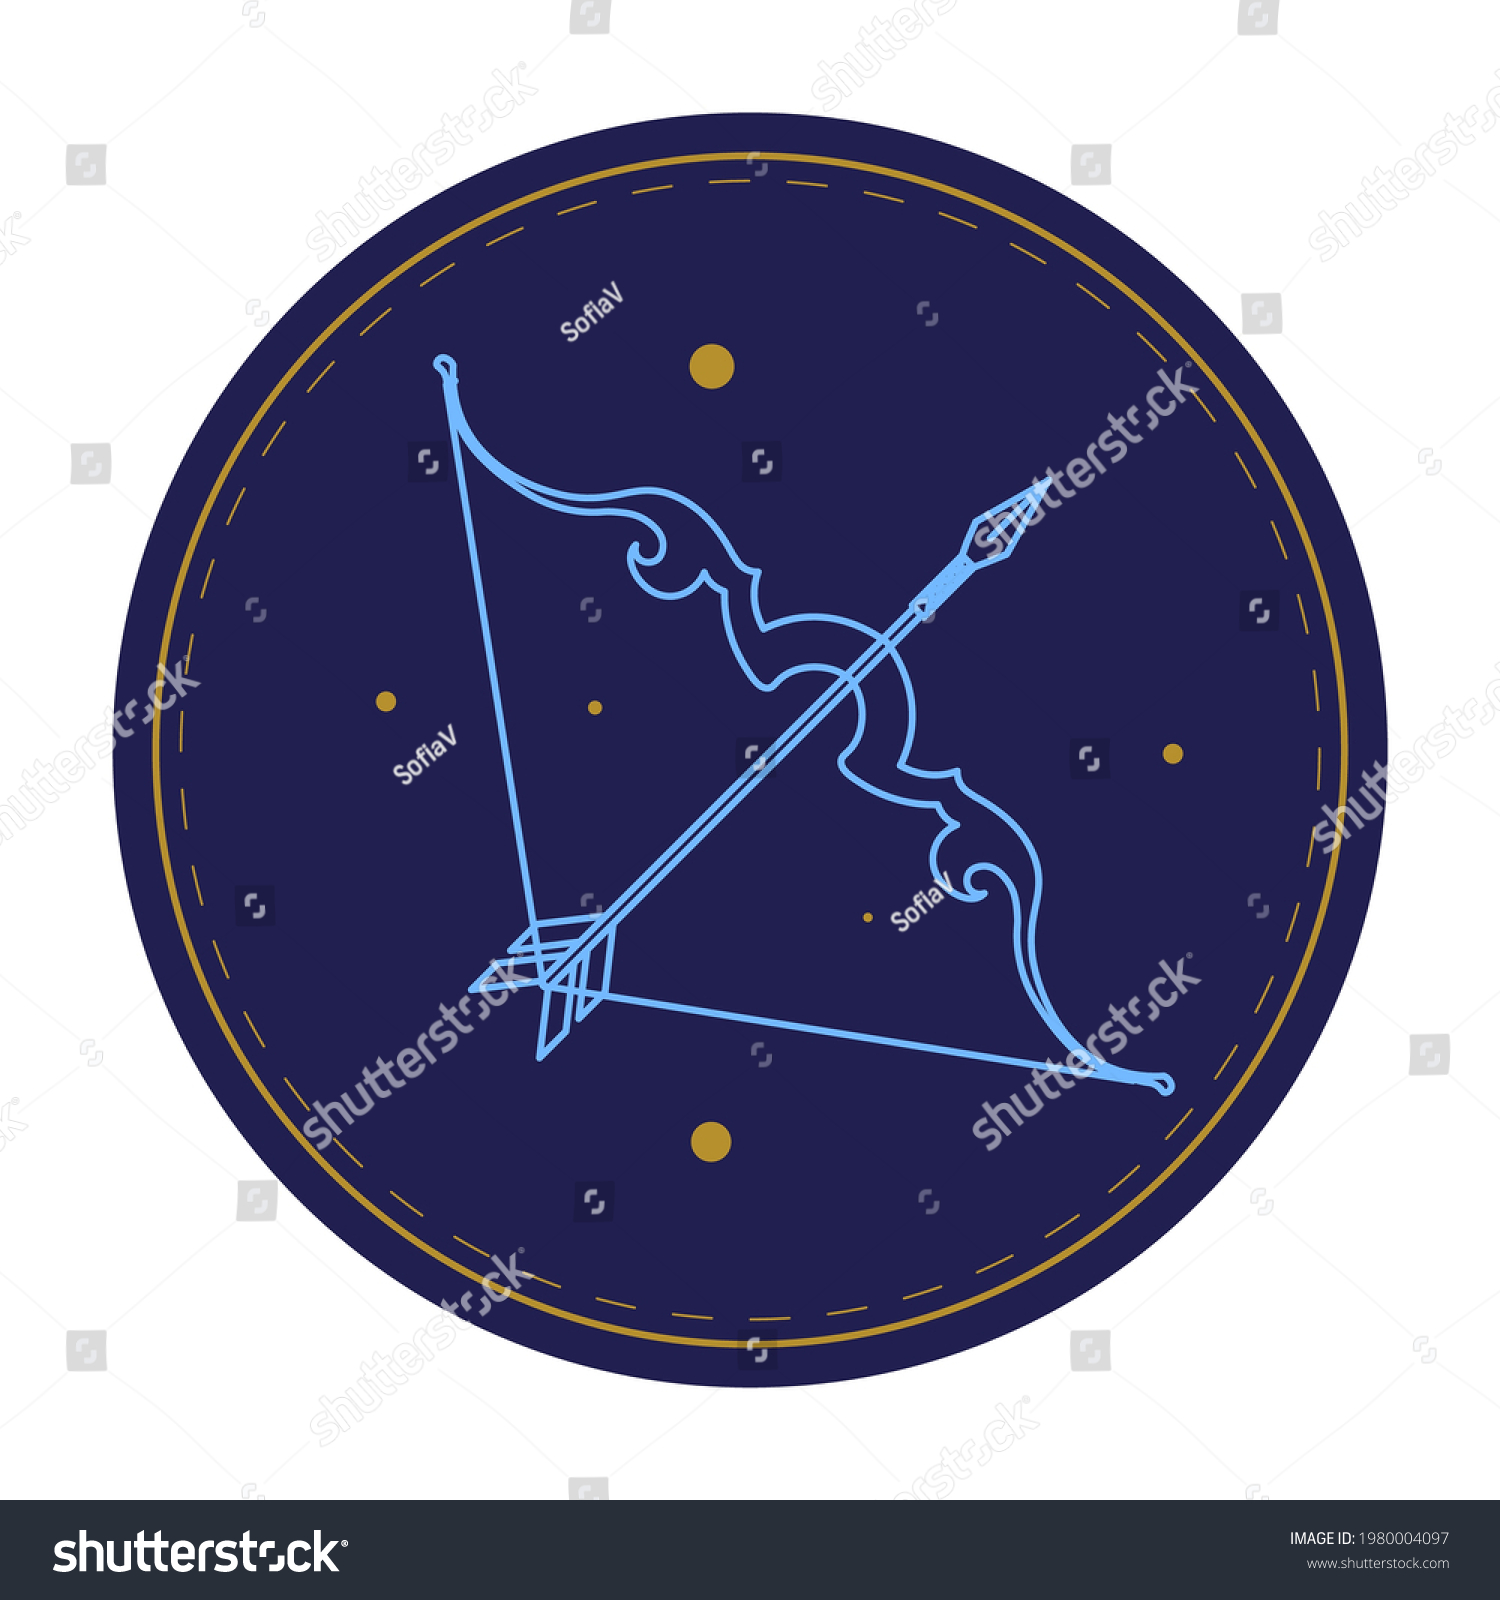 SVG of Archer astrological sign of sagittarius, isolated horoscope sign depicting stars and constellation. Astronomy and zodiac icon with bow and arrows, esoteric traits and prediction. Vector in flat style svg